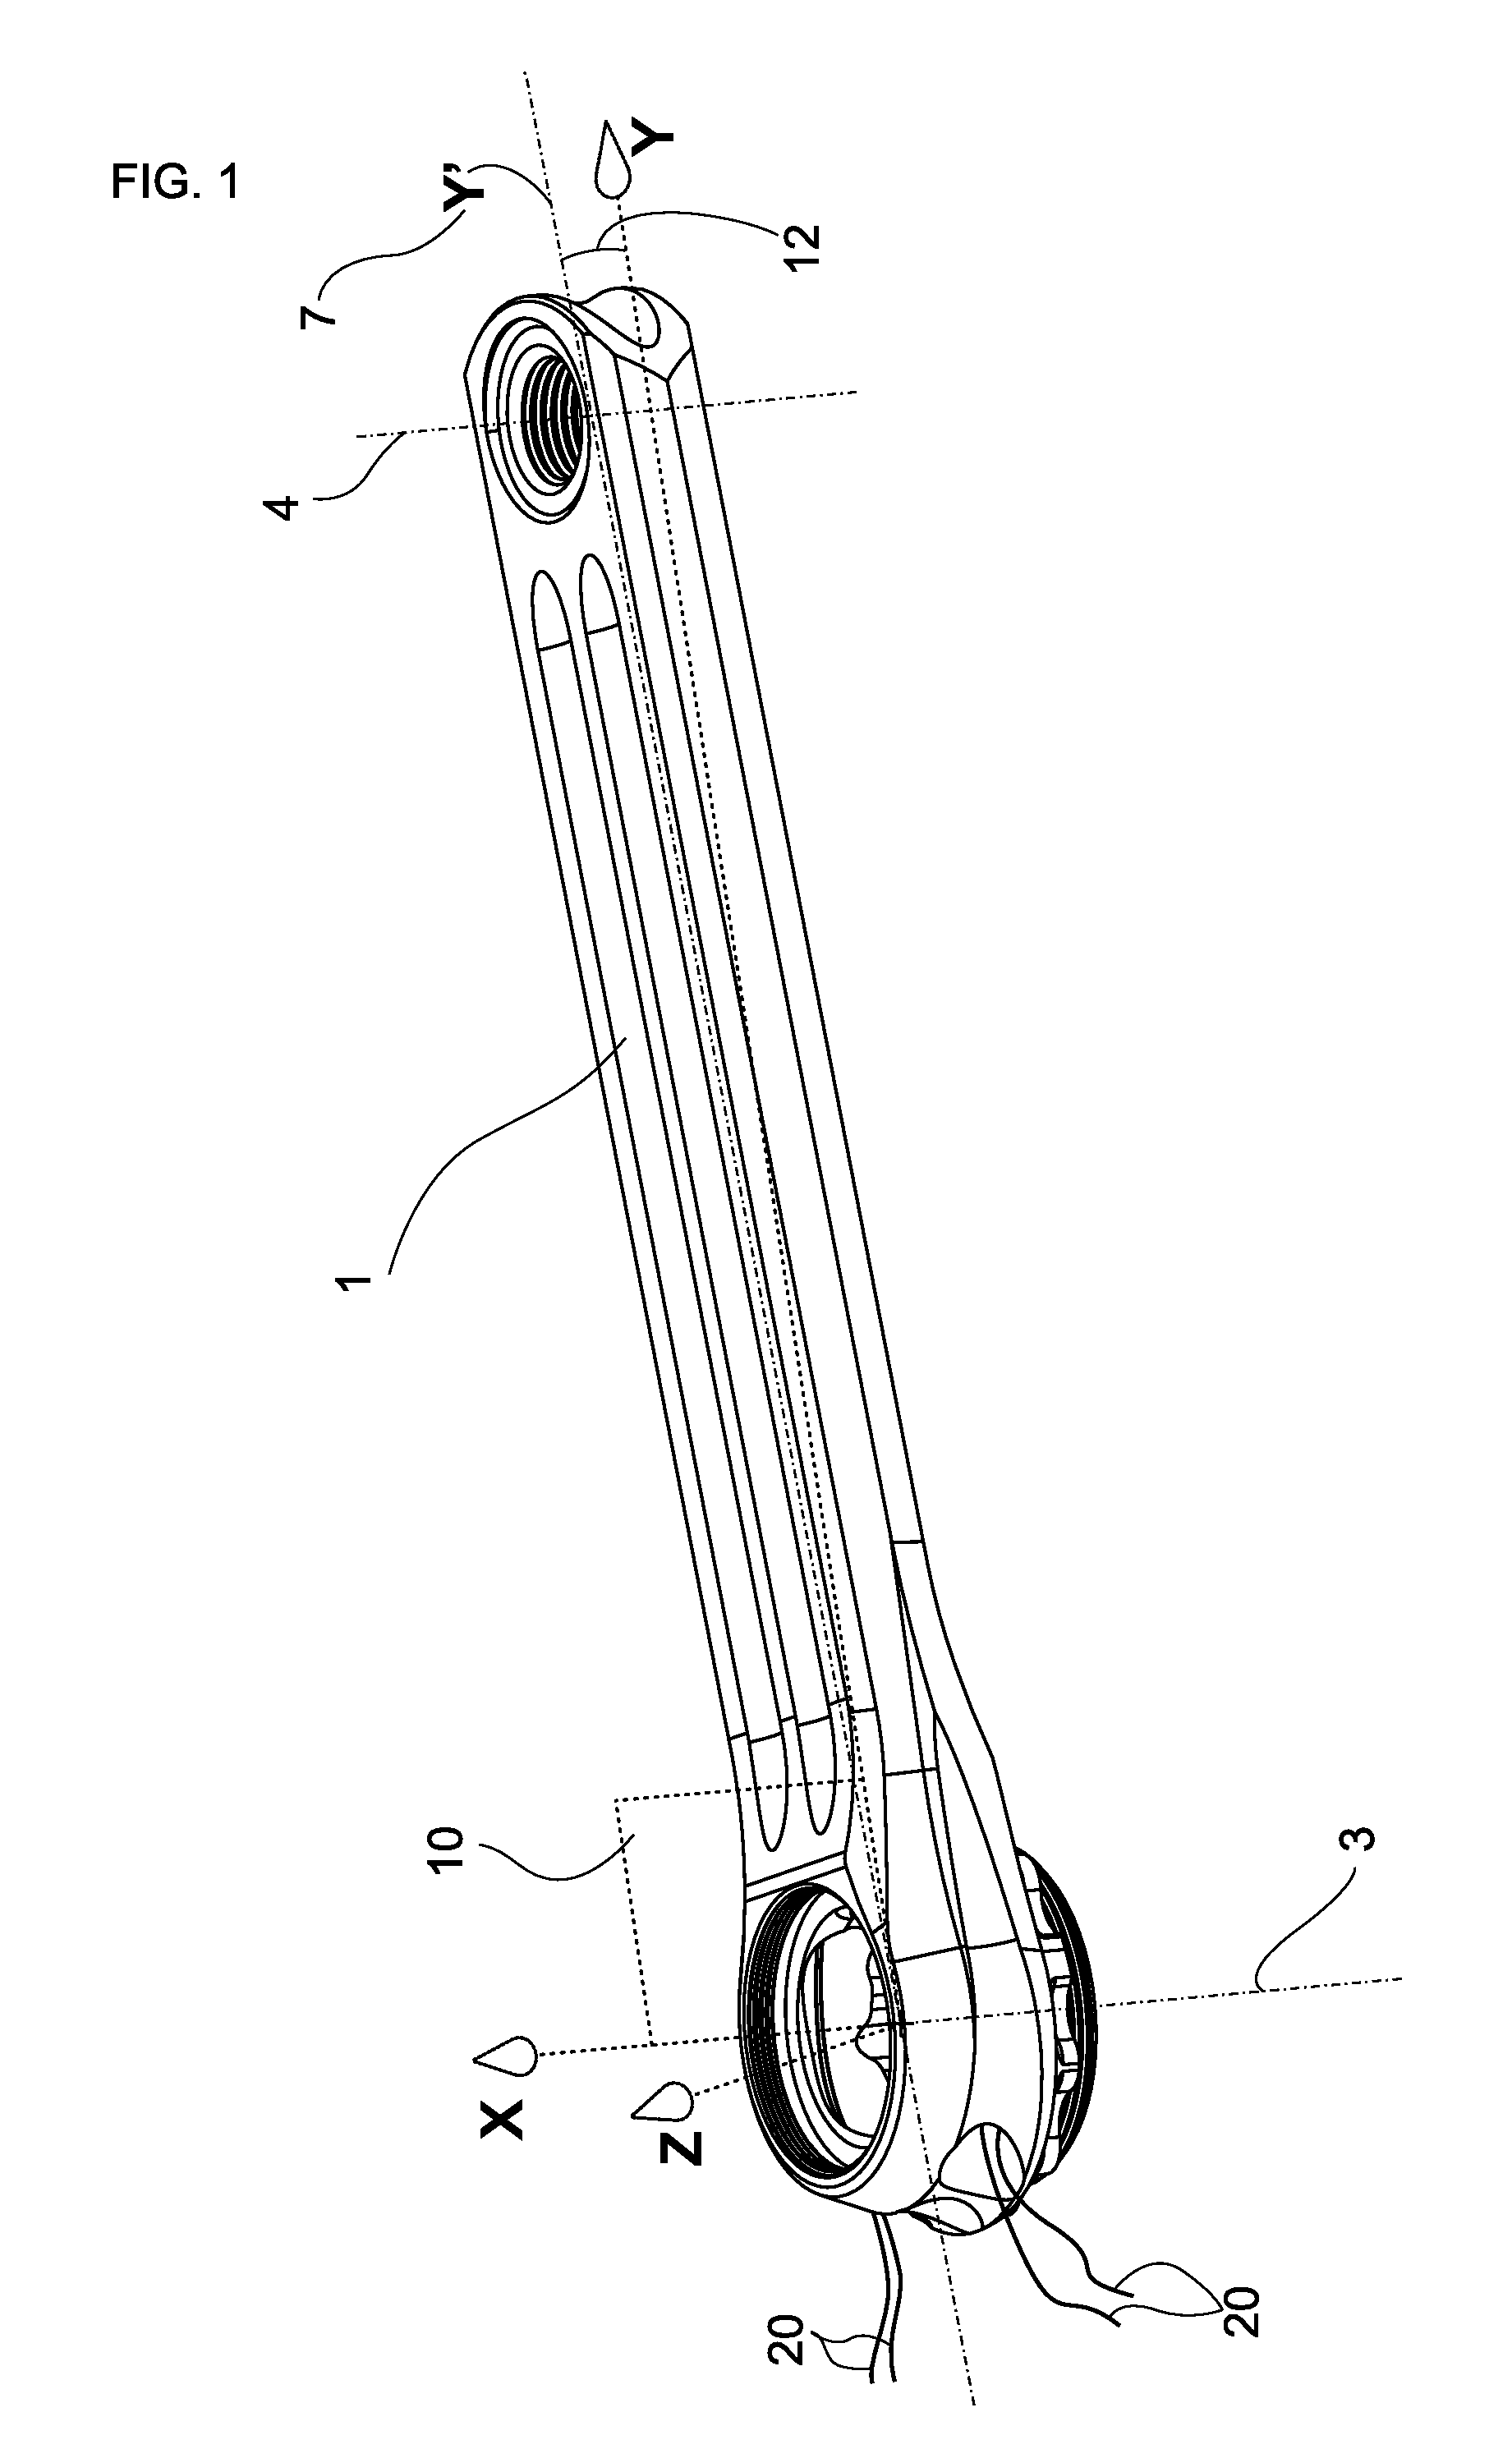 Pedaling Torque Sensor Device for Each Cyclist's Leg and Power Meter Apparatus